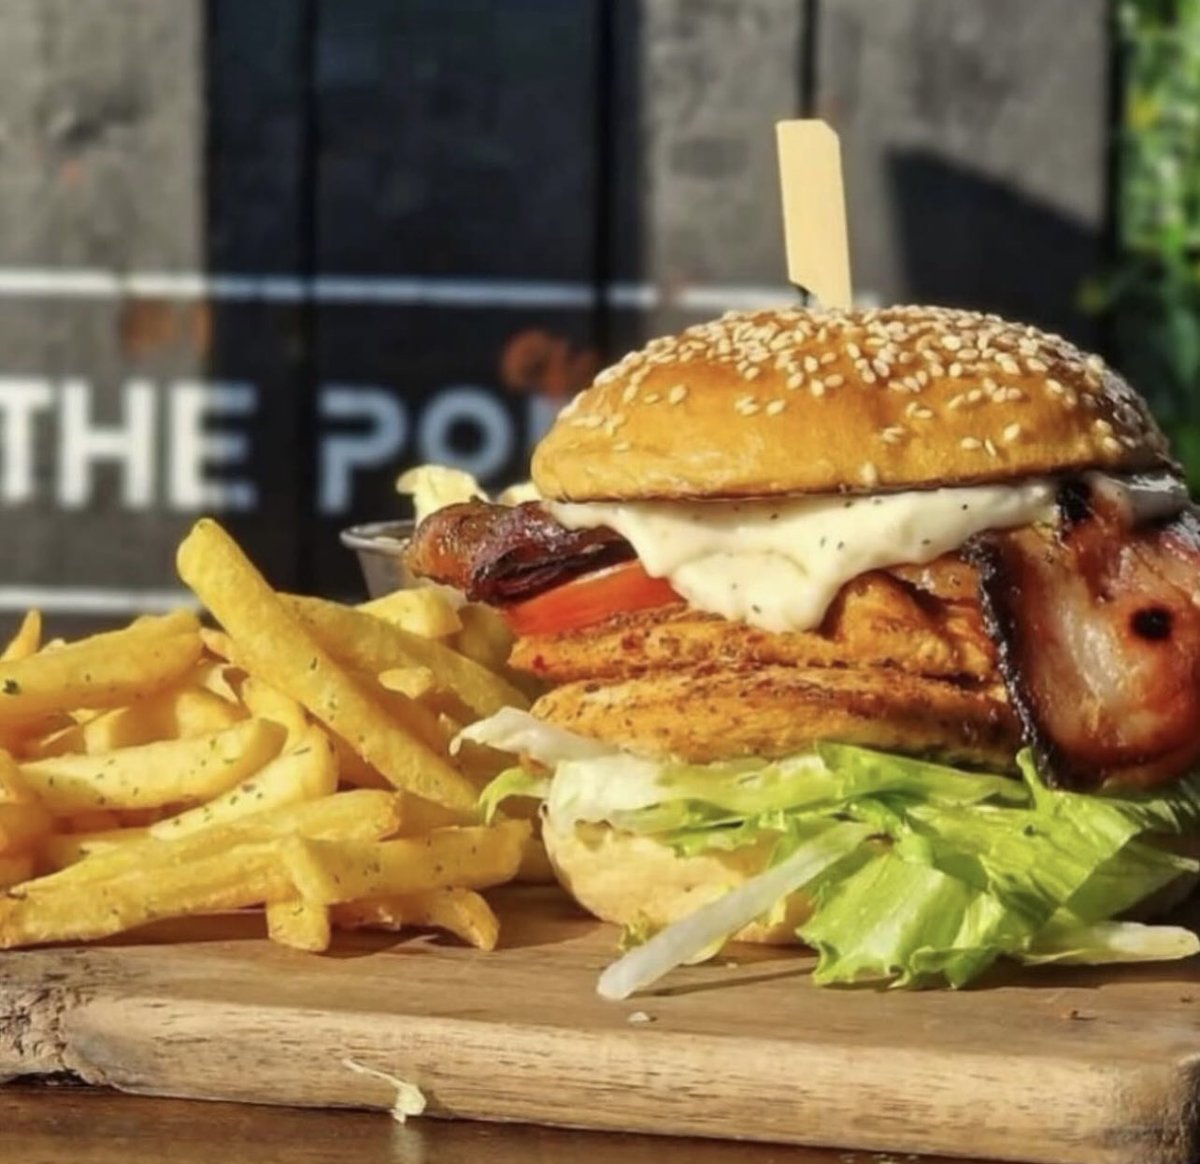 All turkey’d out? Join us for some festive street food🤩 Serving food until 9pm this evening. No need to book, just turn up🙌🏽 #thepod #newport #cardiff #wales #streetfood #food #foodies #welshfoodies #foodlover #burgers #fries #chips #goodfood #goodmood #thursday #thursdaynight